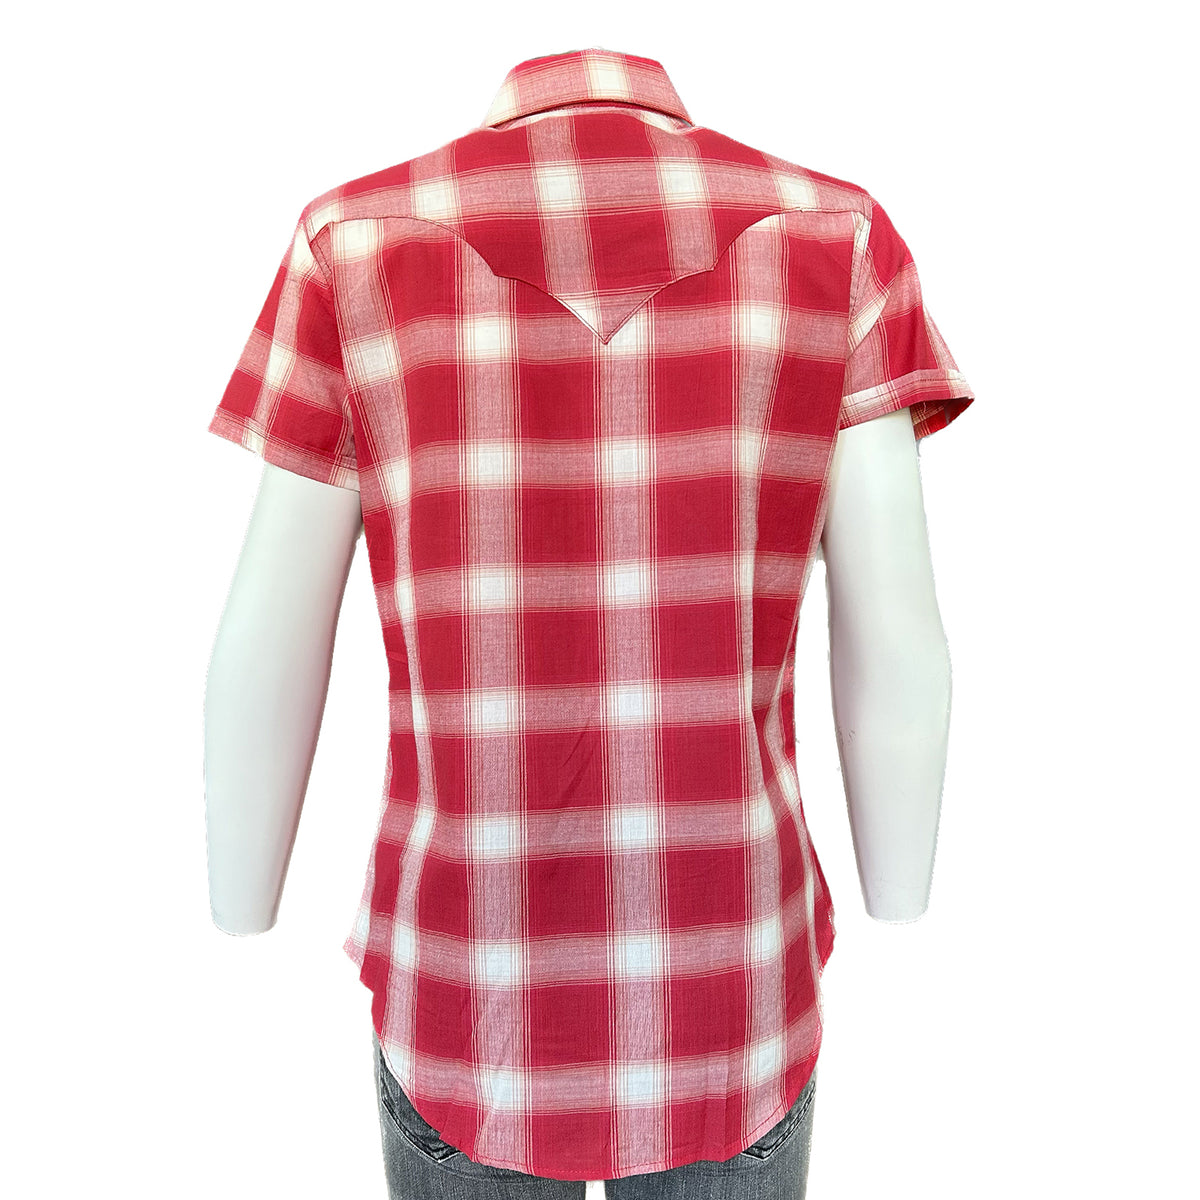 Women's Short Sleeve Shadow Plaid Western Shirt in Red